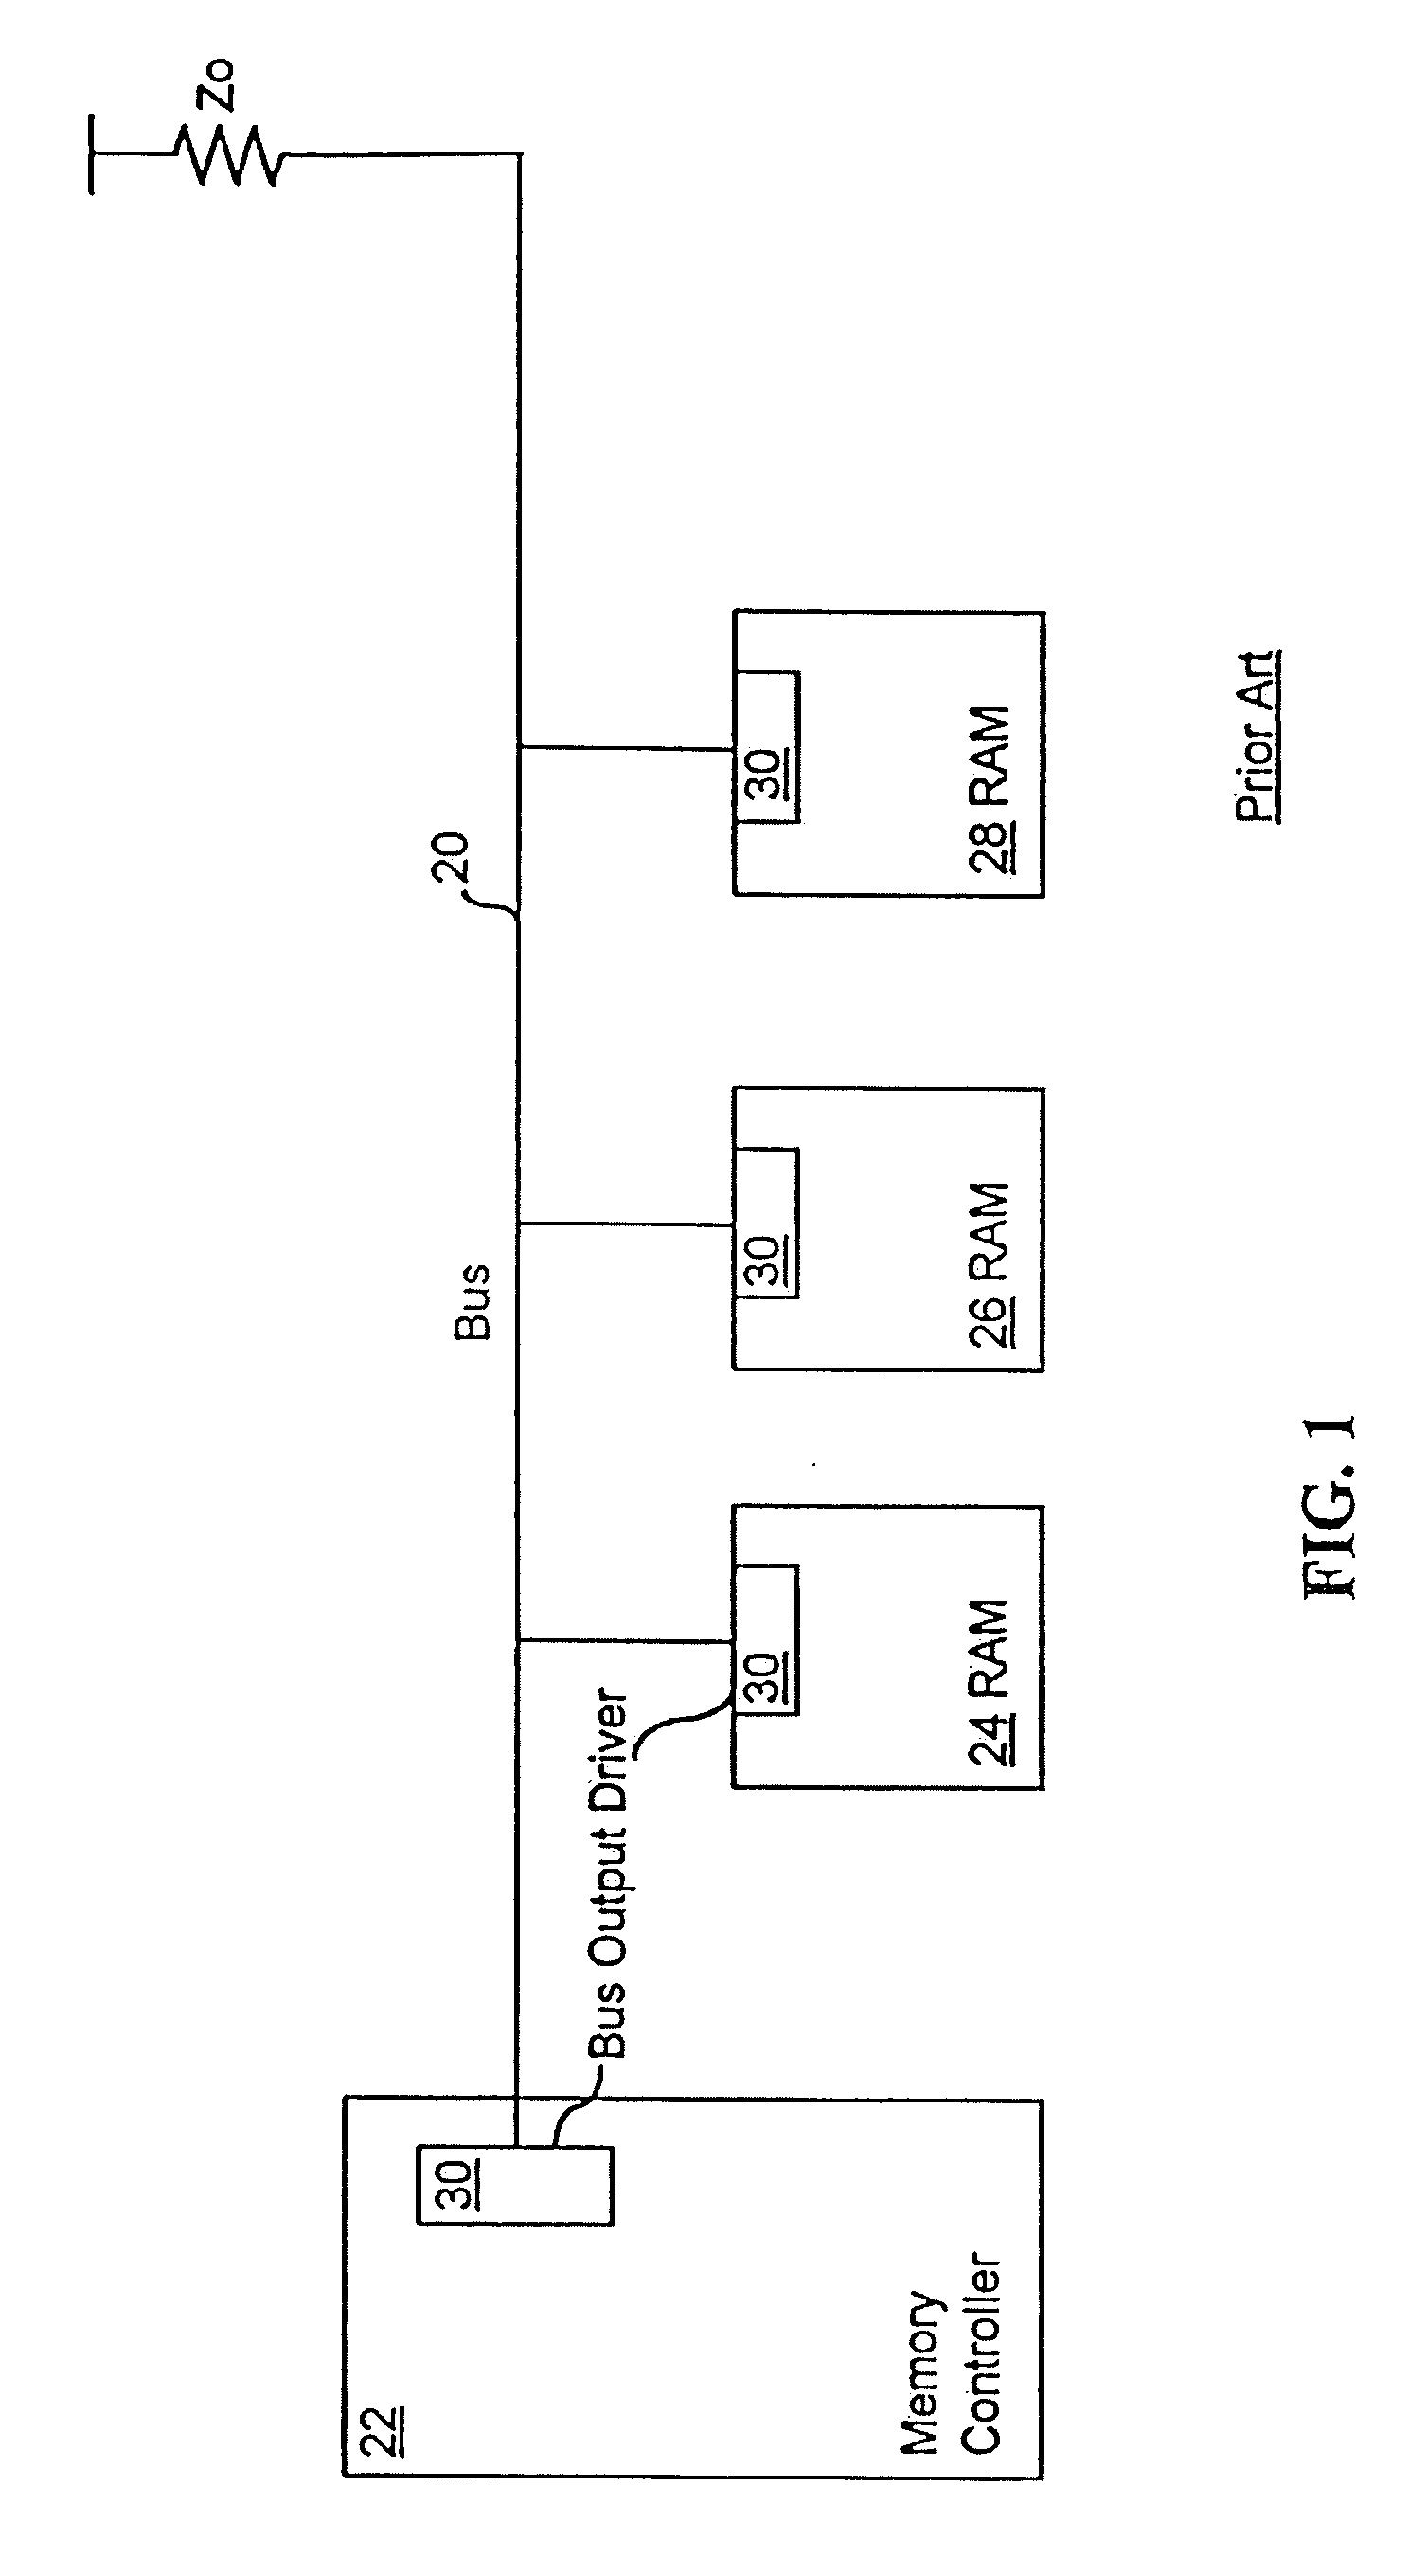 Impedance controlled output driver